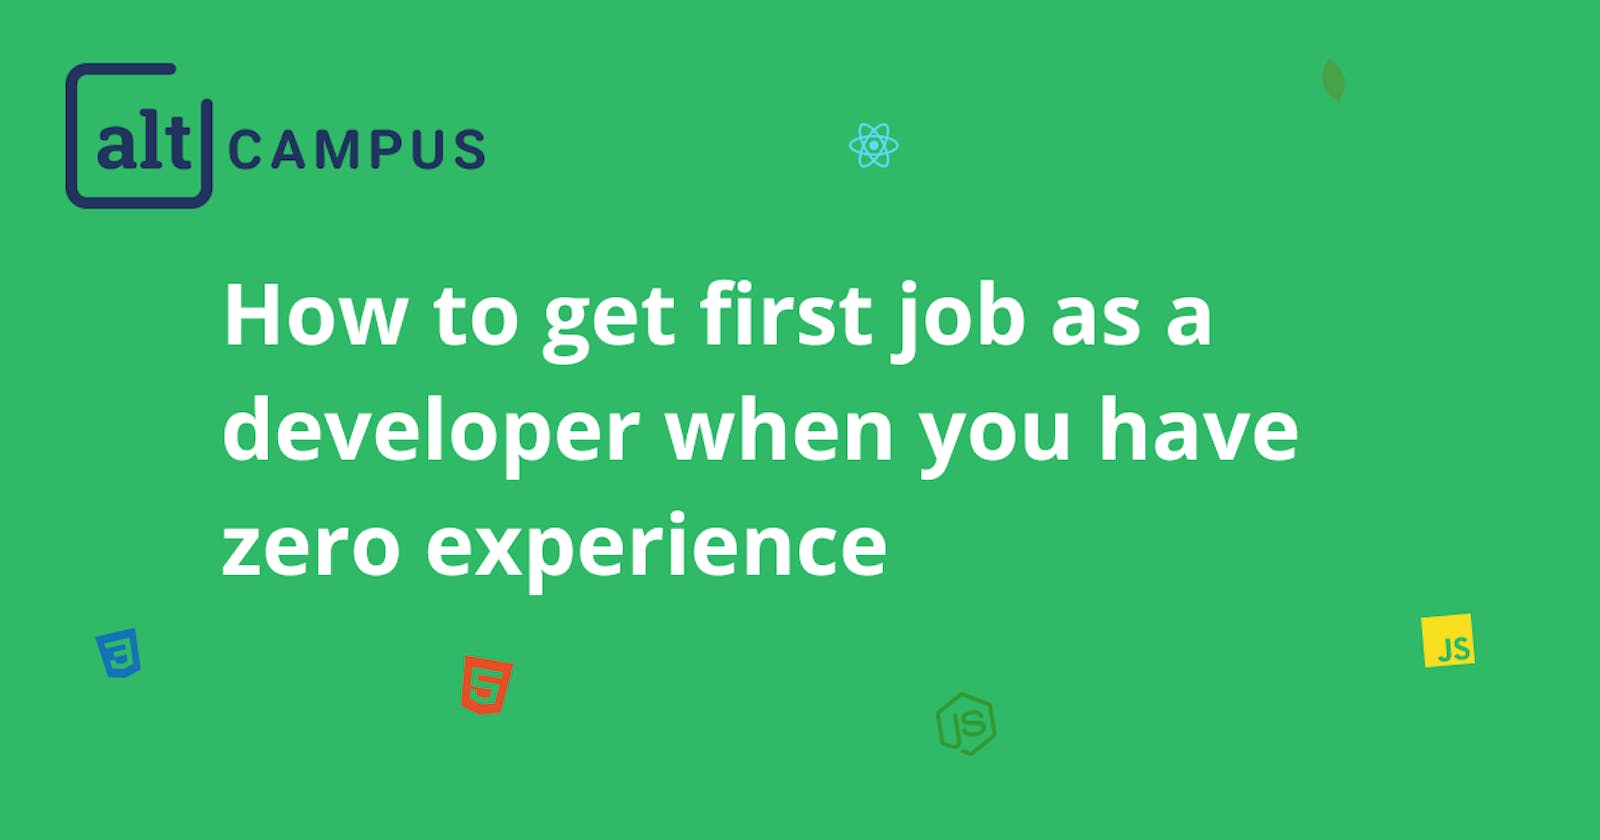 How to get the first job as a developer when you have zero experience